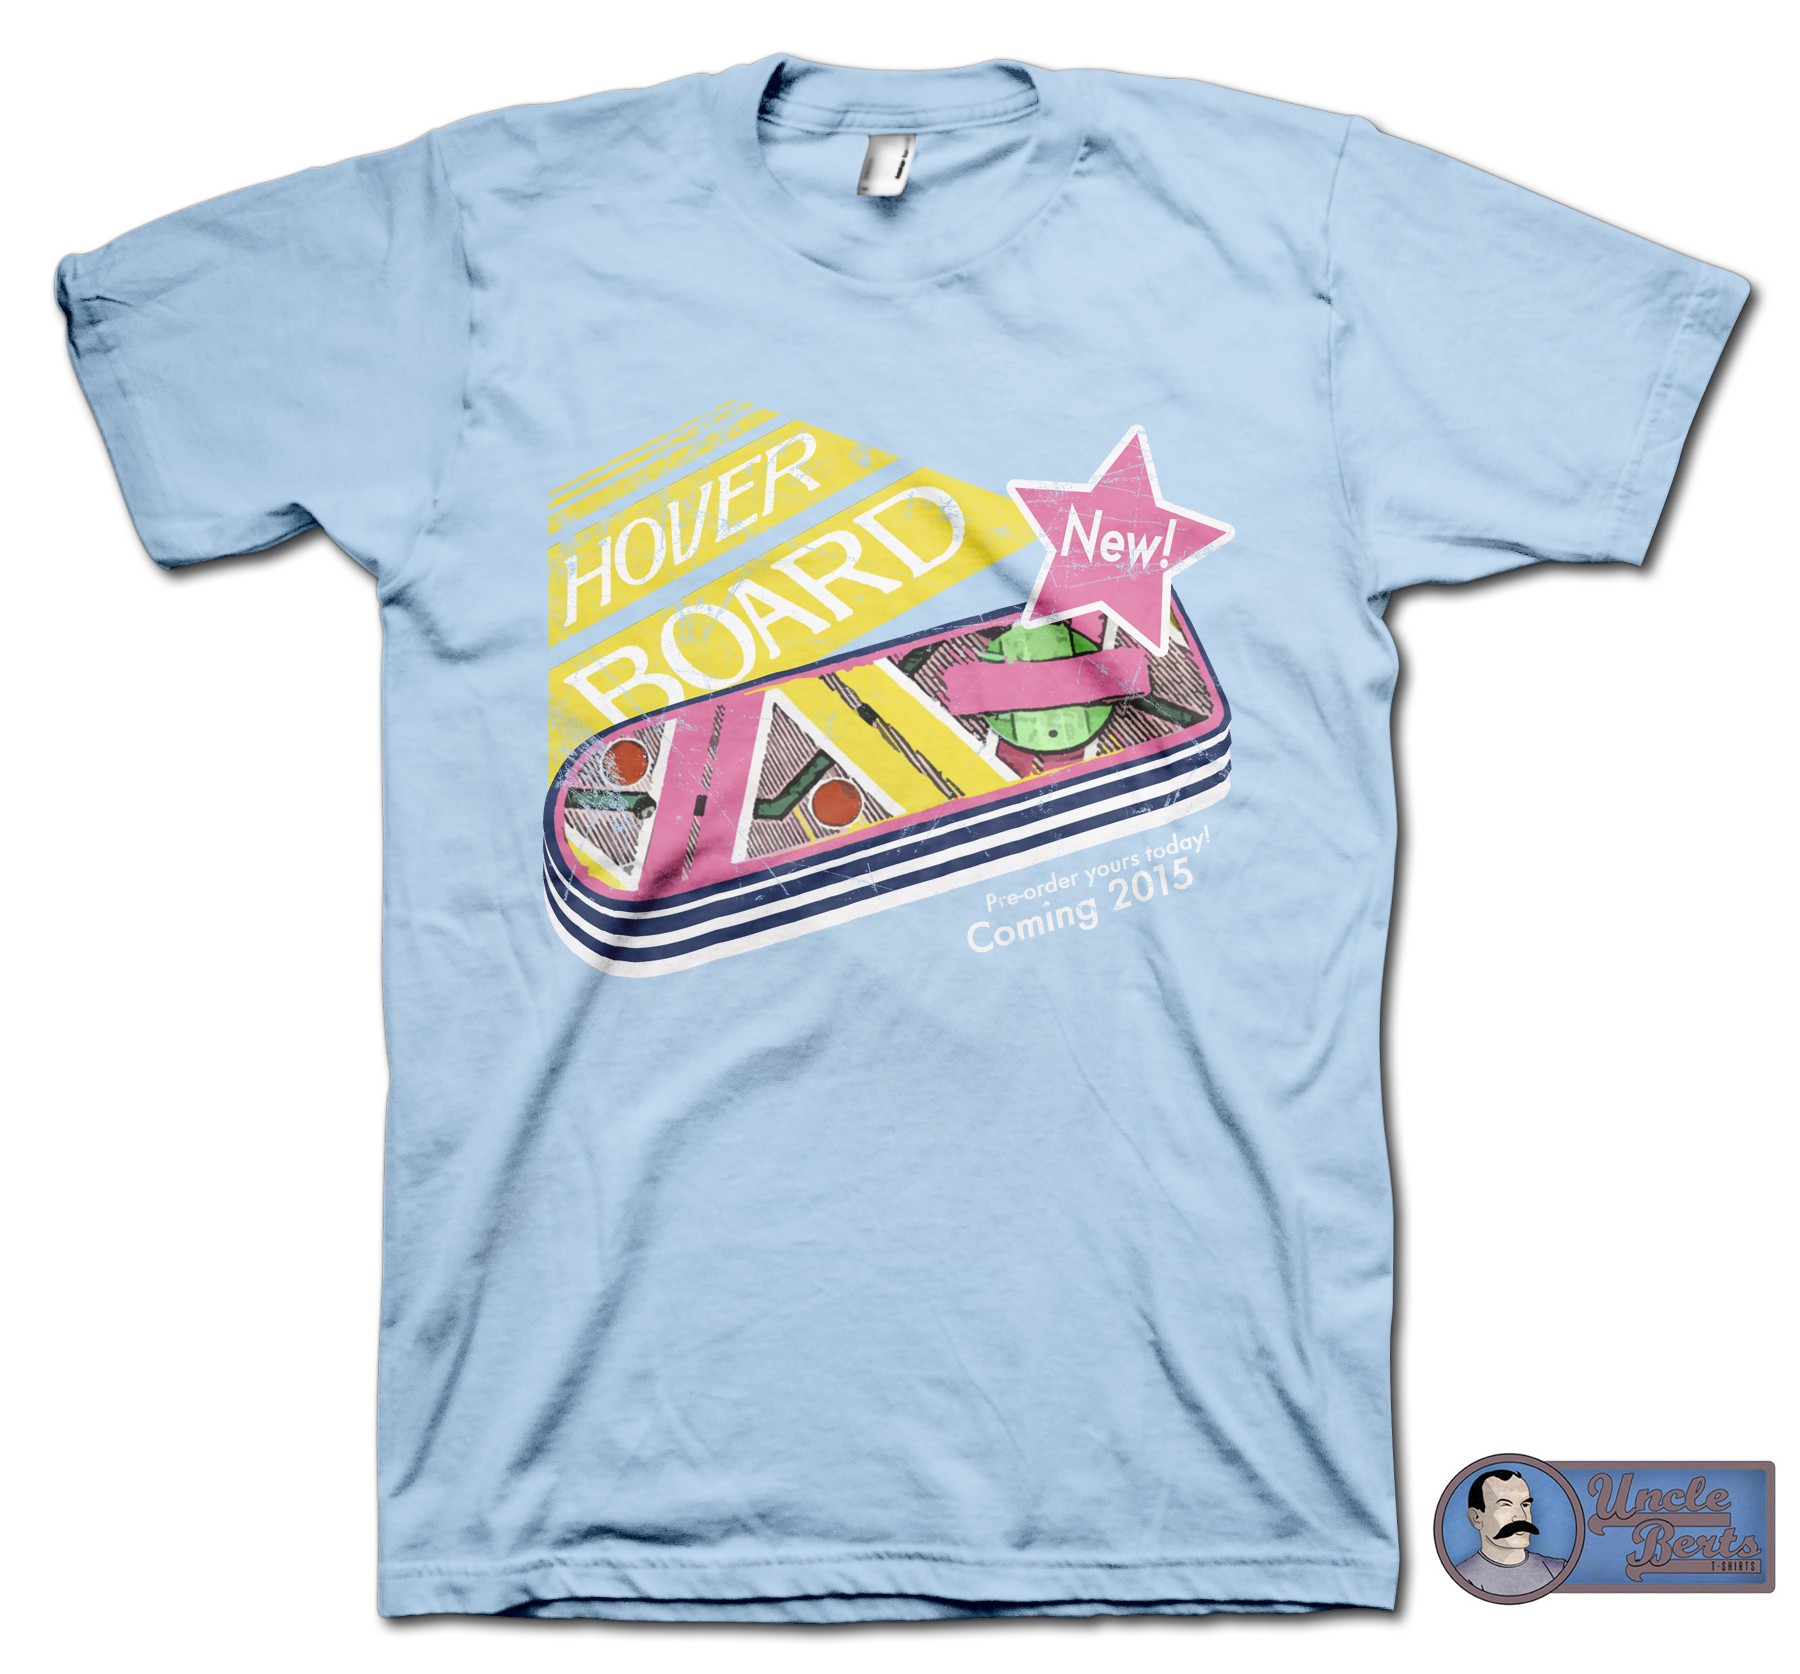 Back to the Future Part II (1989) Inspired Hover Board T-Shirt